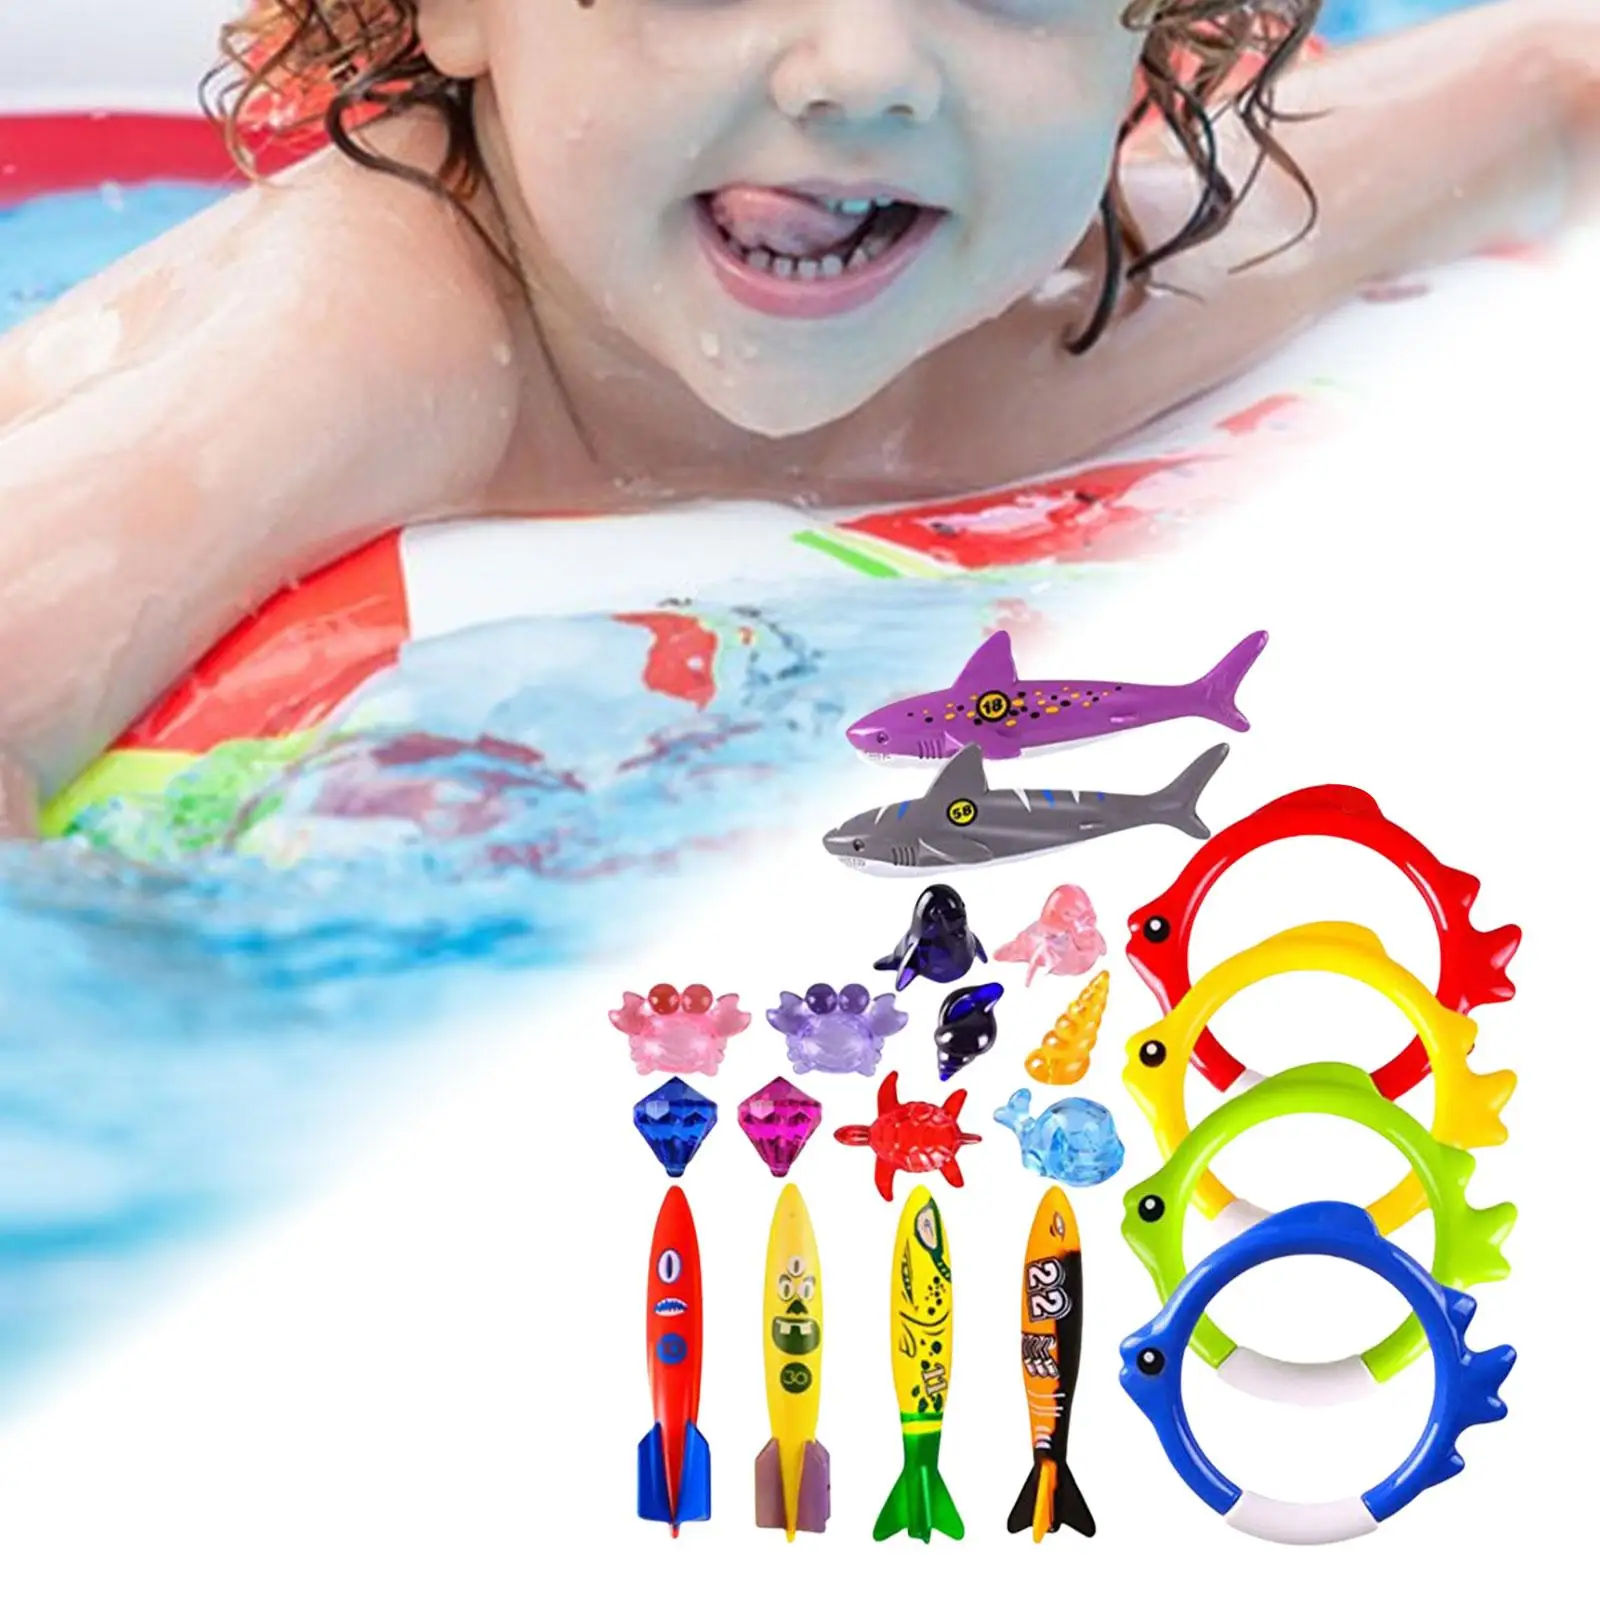 20 Pieces Fun Swim Games Sinking Set Party Favors Sea Animals Diving Toys Underwater Dive Gifts for Pool Kids Ages 3+